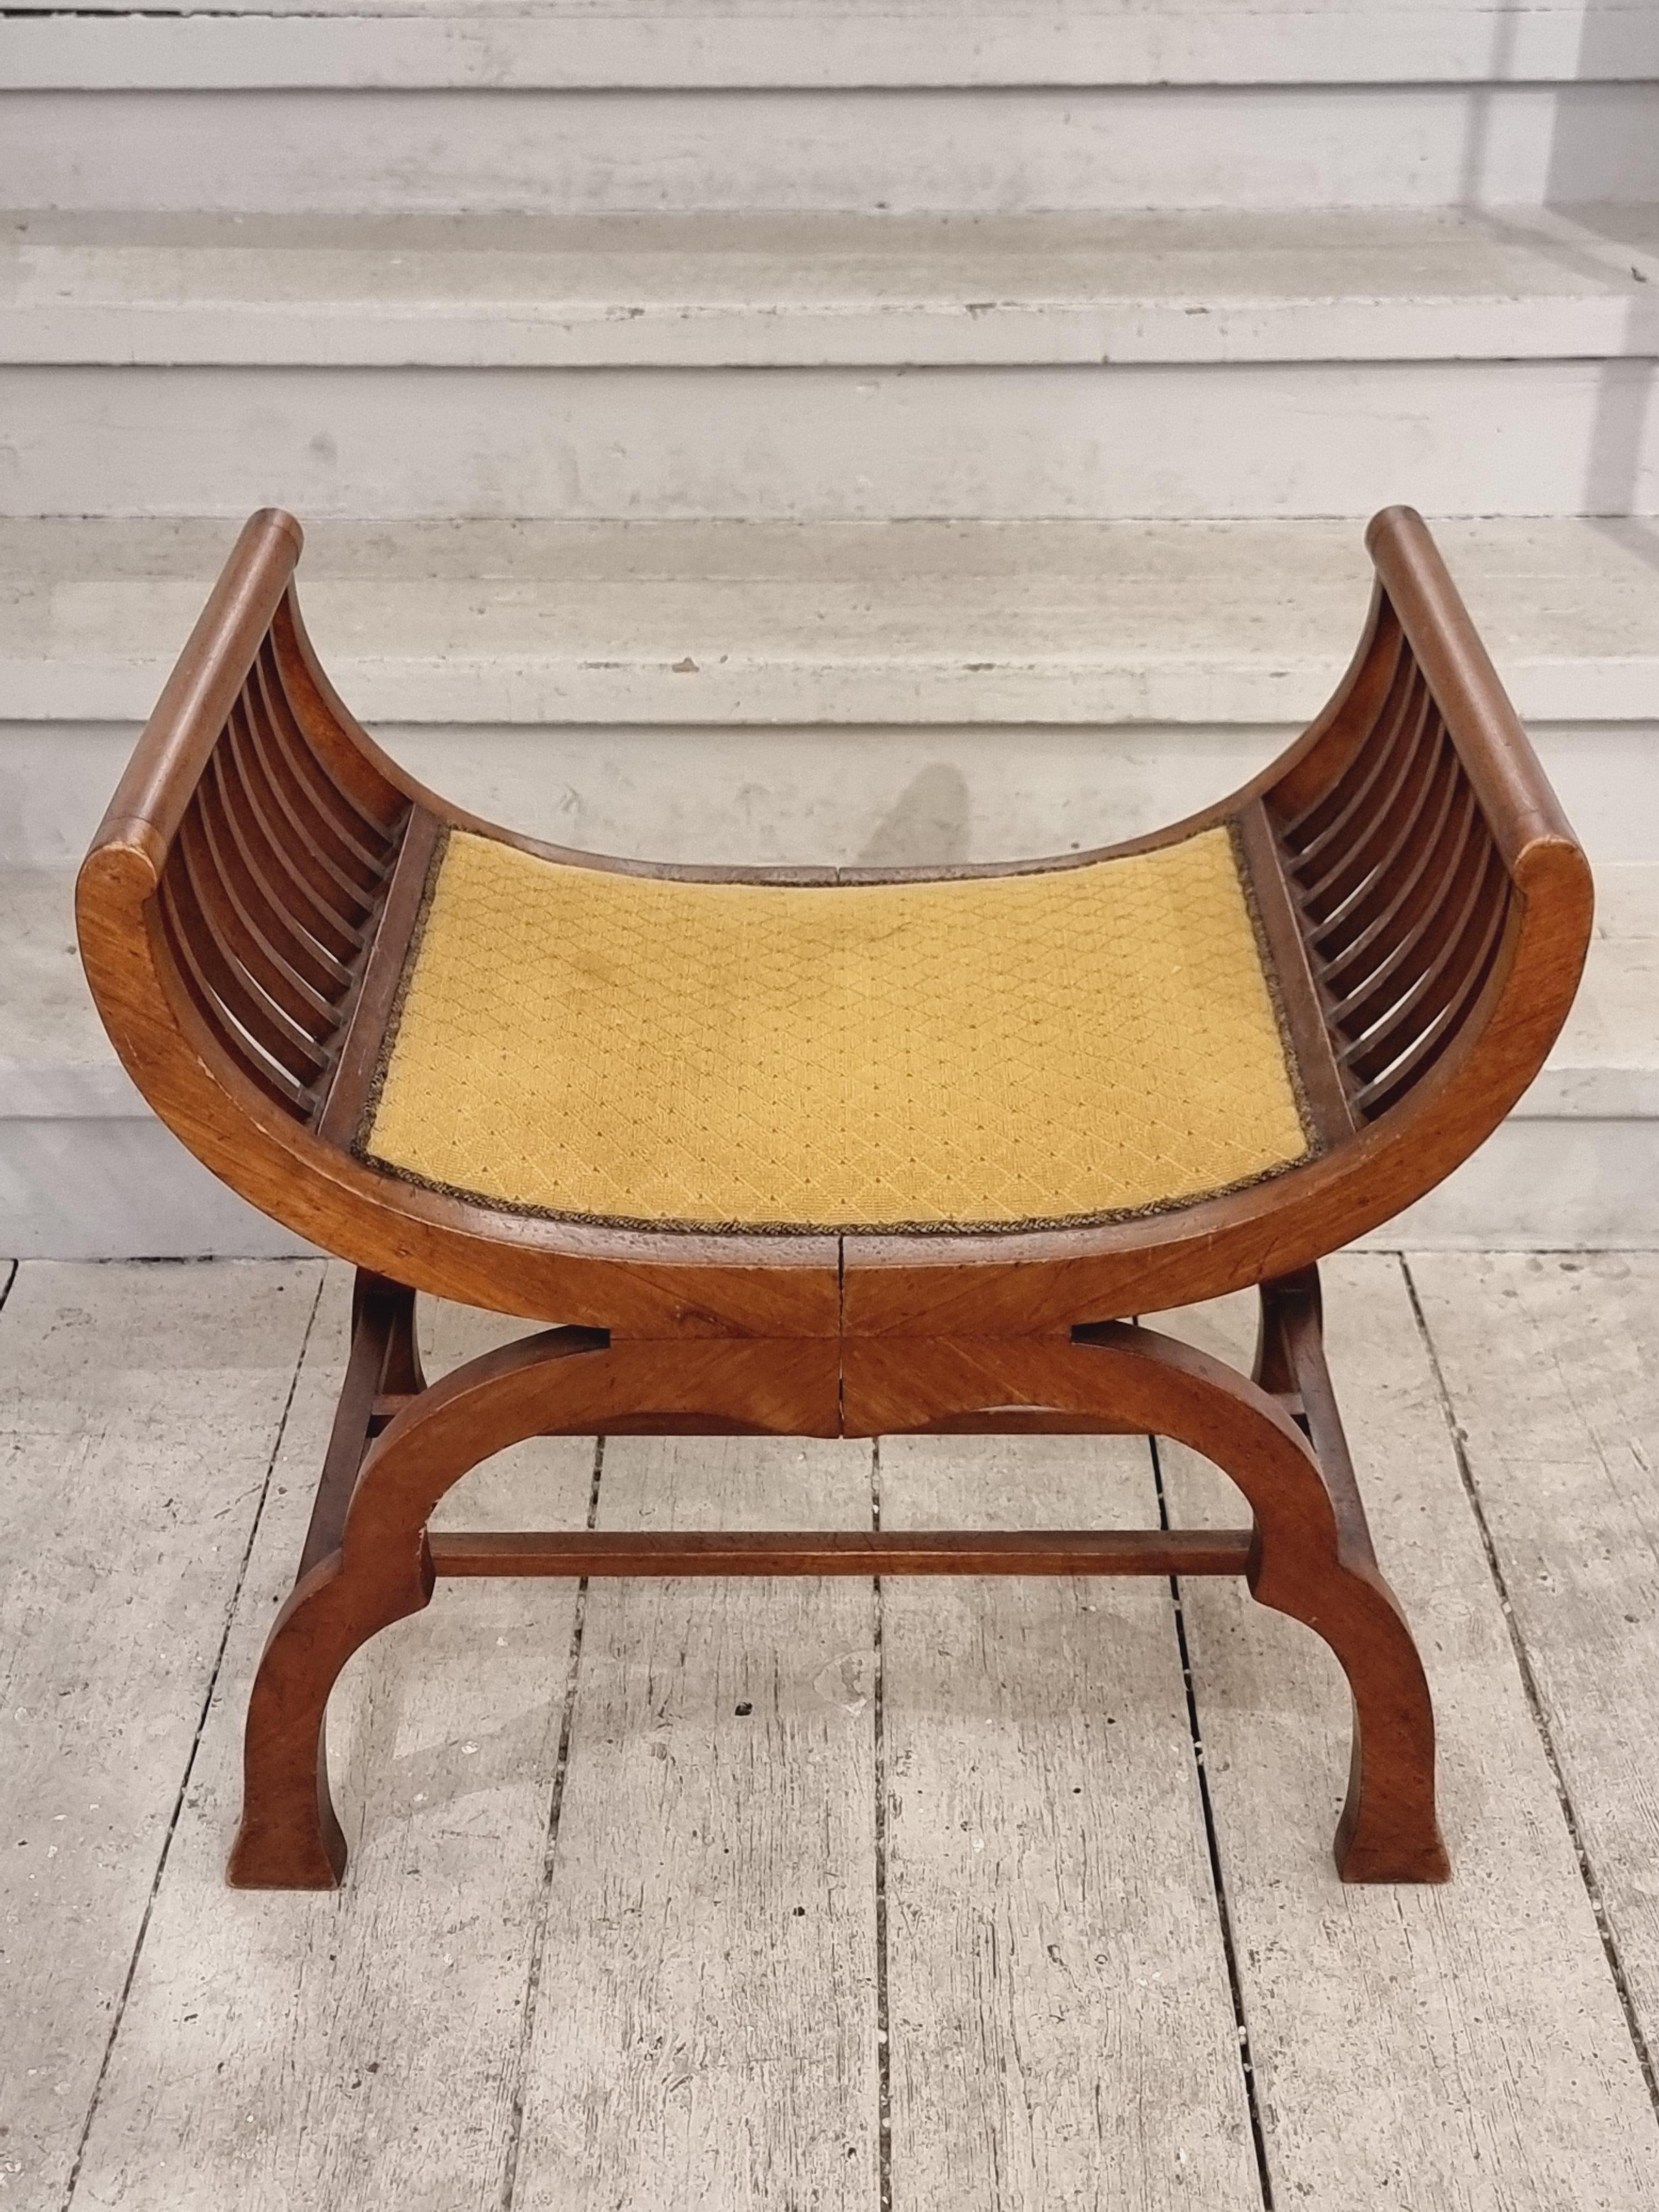 Decorative and functional gondola stool in walnut and original fabric. Wonderful timeless shape which works in most rooms and interiors.  

In good condition, smaller signs of age and wear. A few vague discolorations on fabric.  Stable. 



